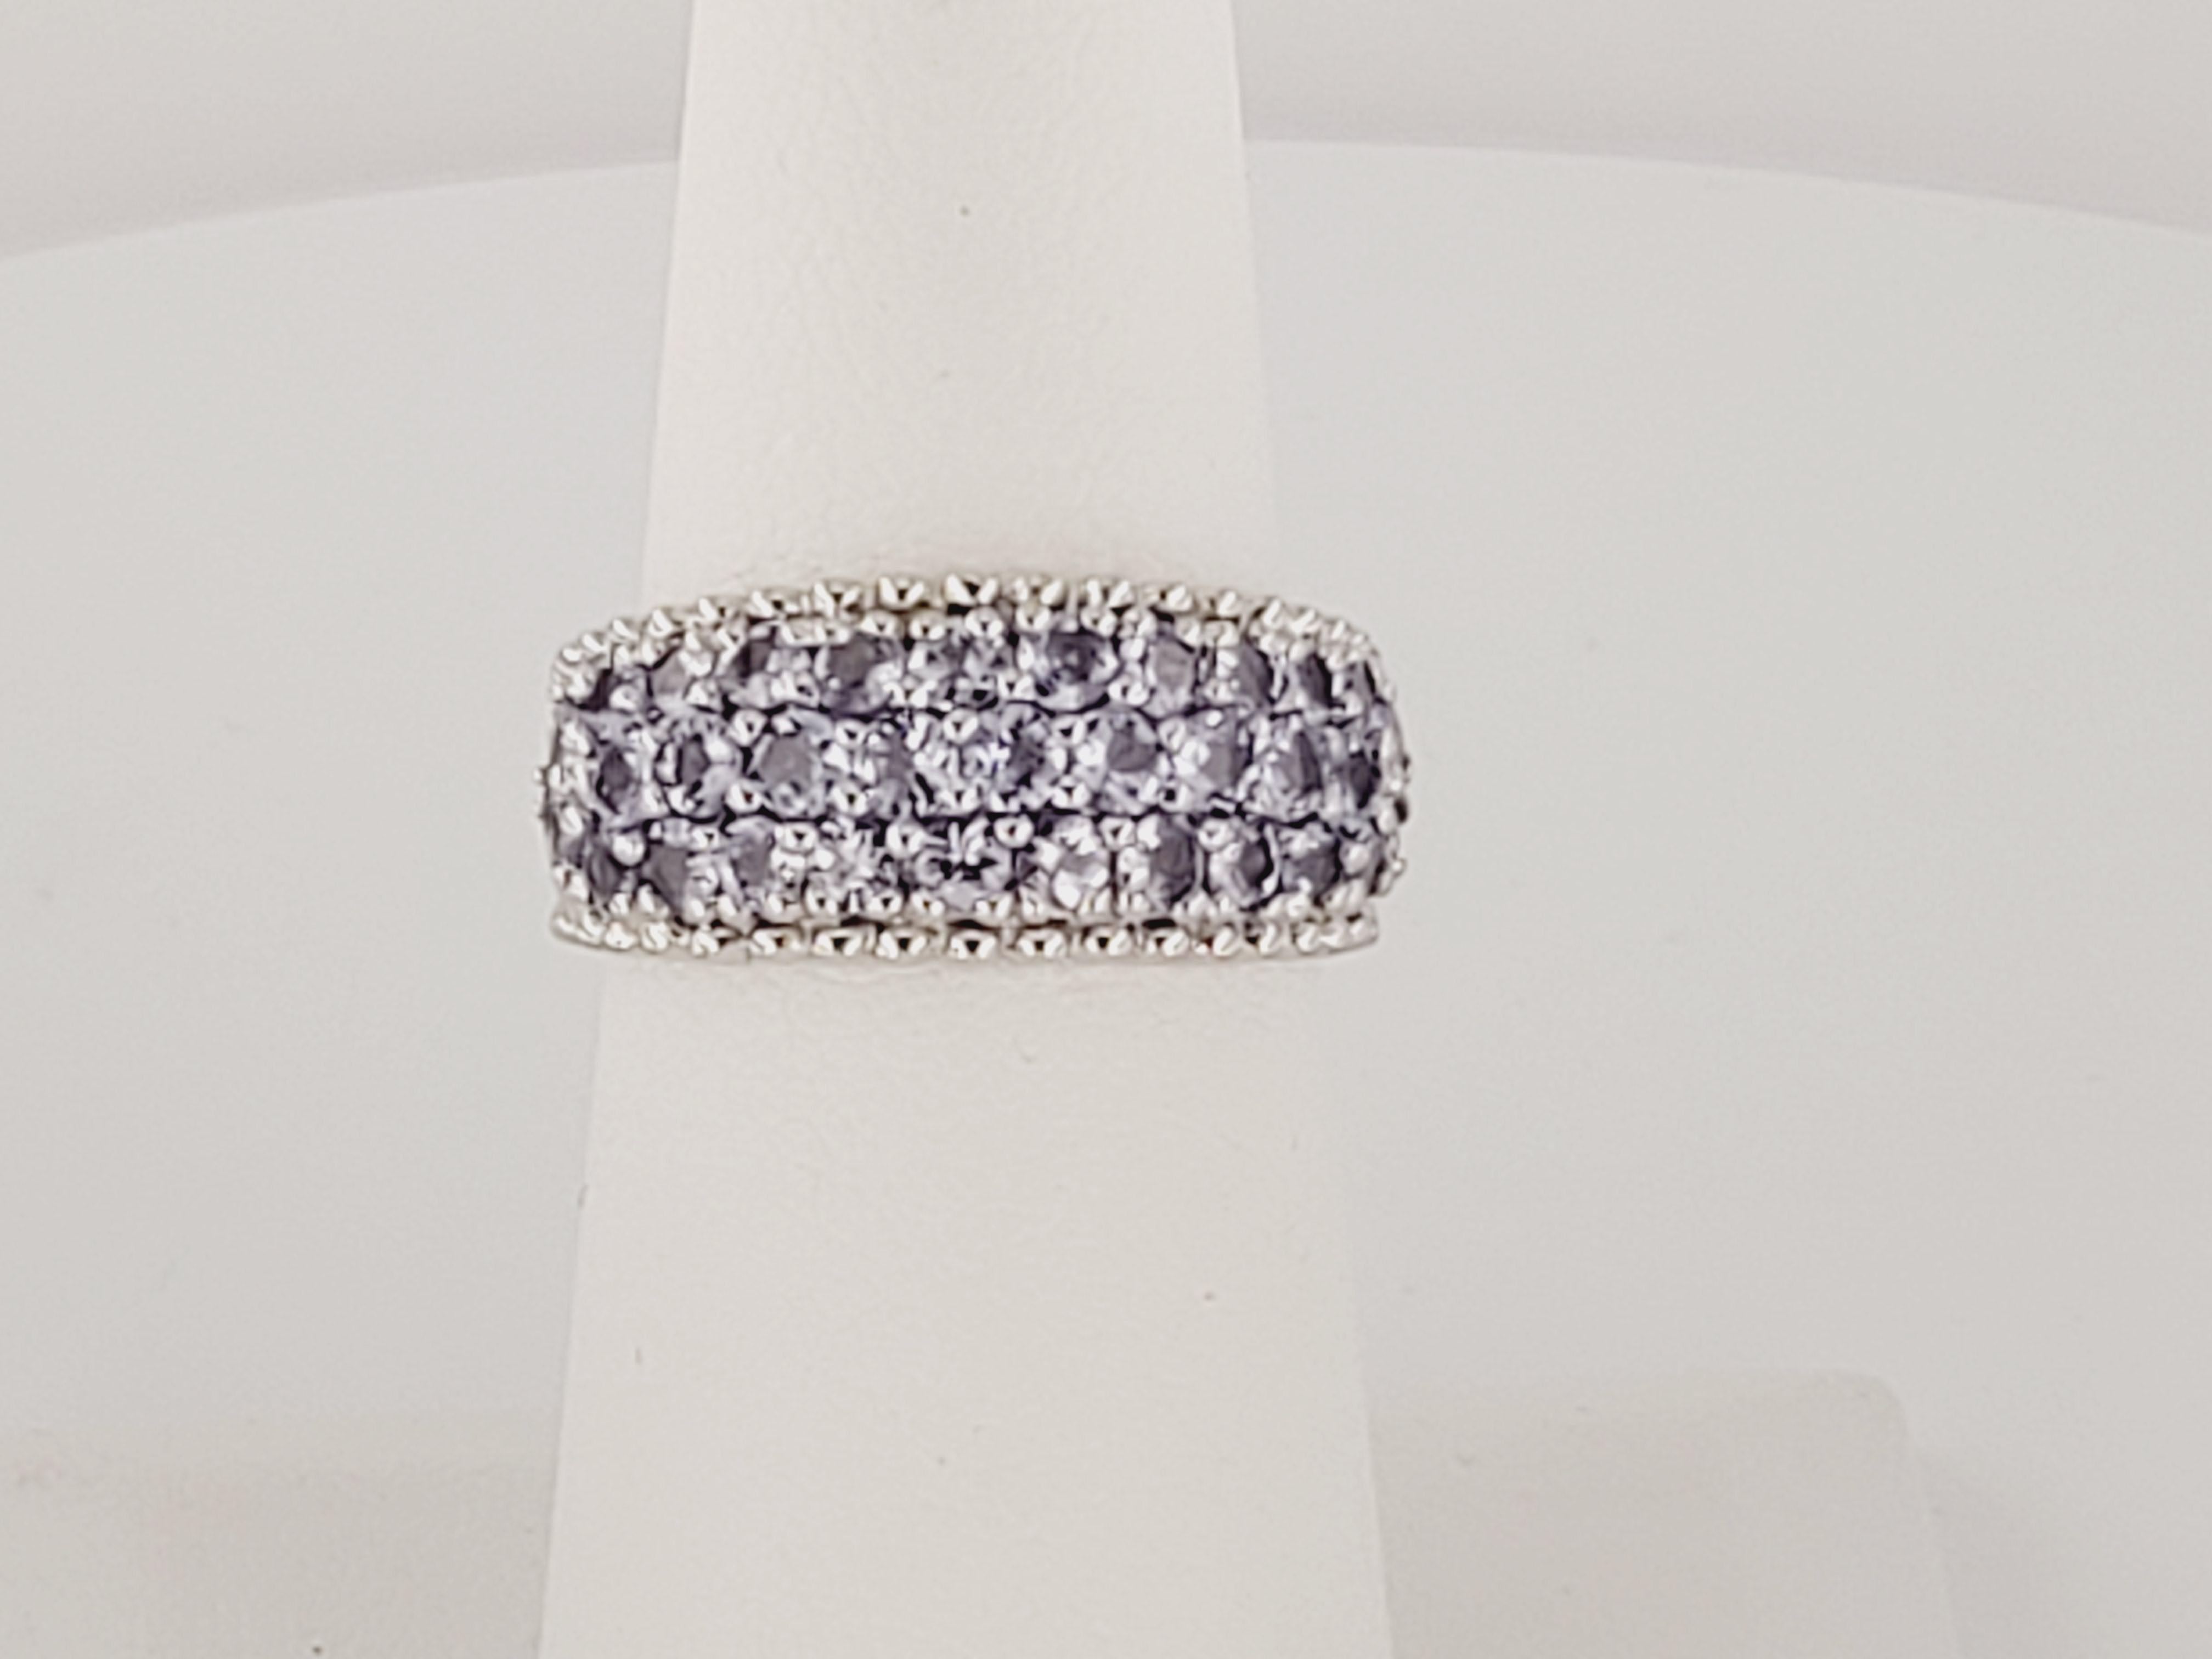 Vintage Tanzanite Ring 
Occasion Wedding
Material: 10K White Gold 
Stone: Tanzanite 3.5ct
Ring Size: 7
Color: Purple white  
Item Type: Vintage 
Condition: New, never worn